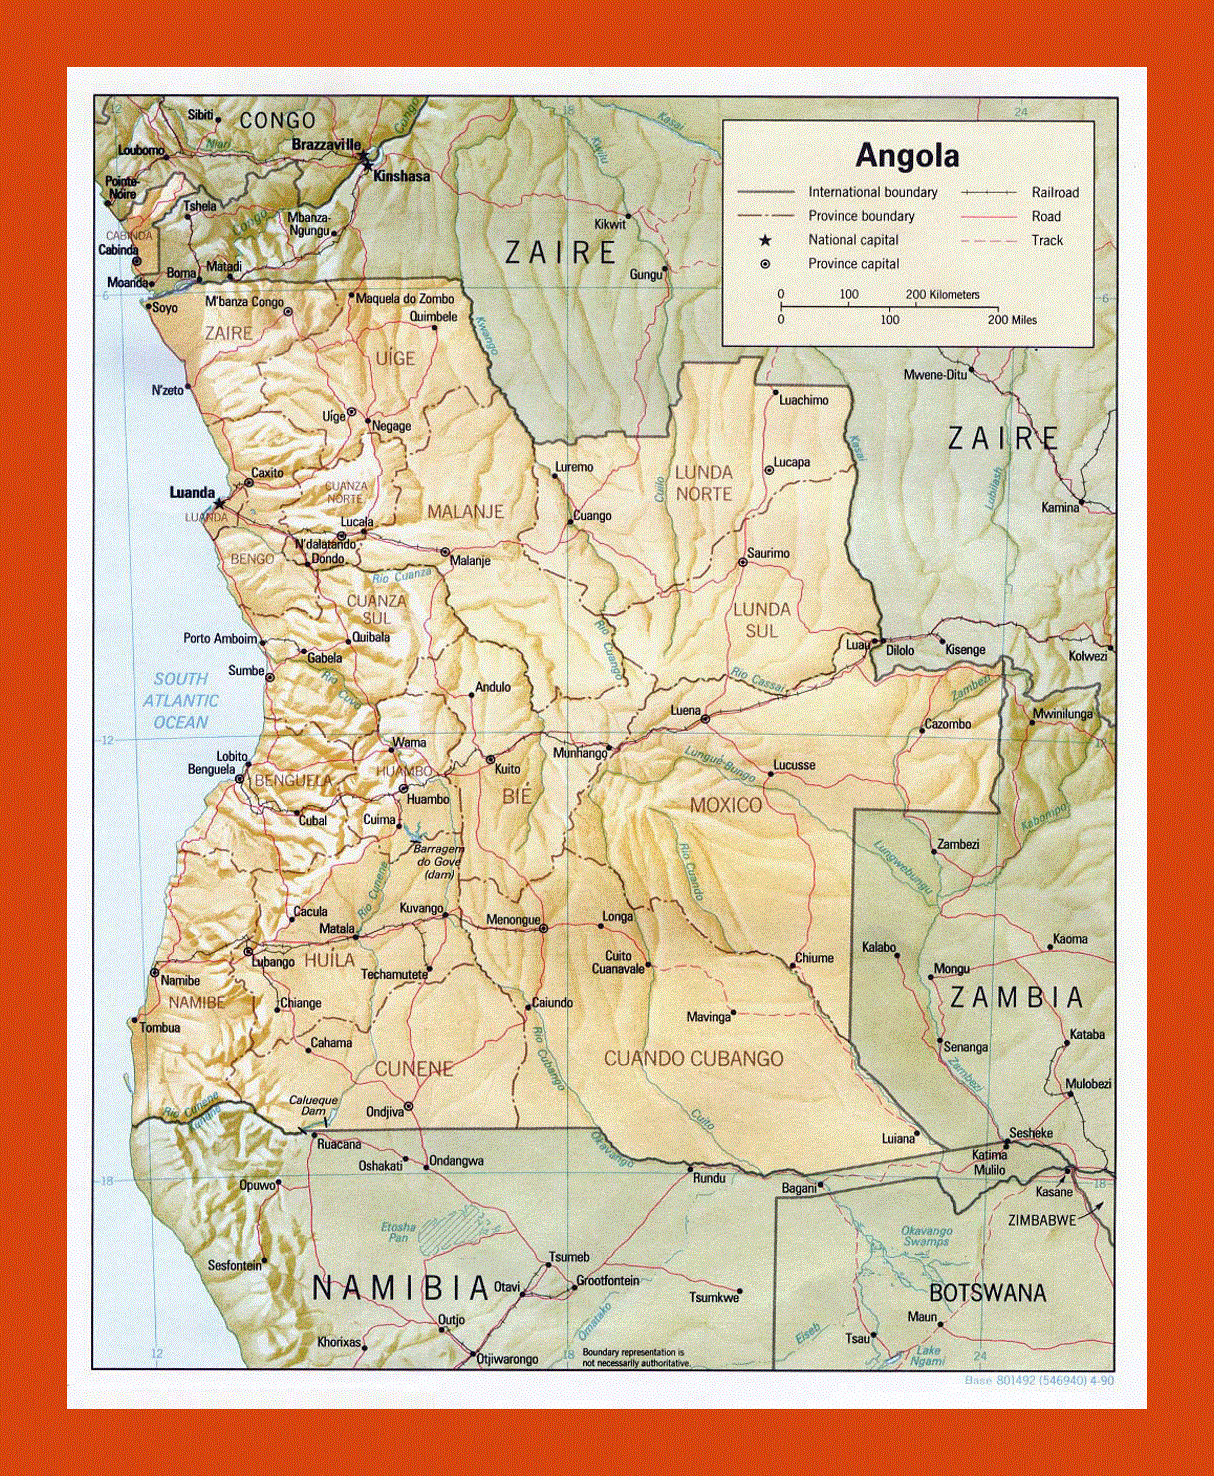 Political and administrative map of Angola - 1990